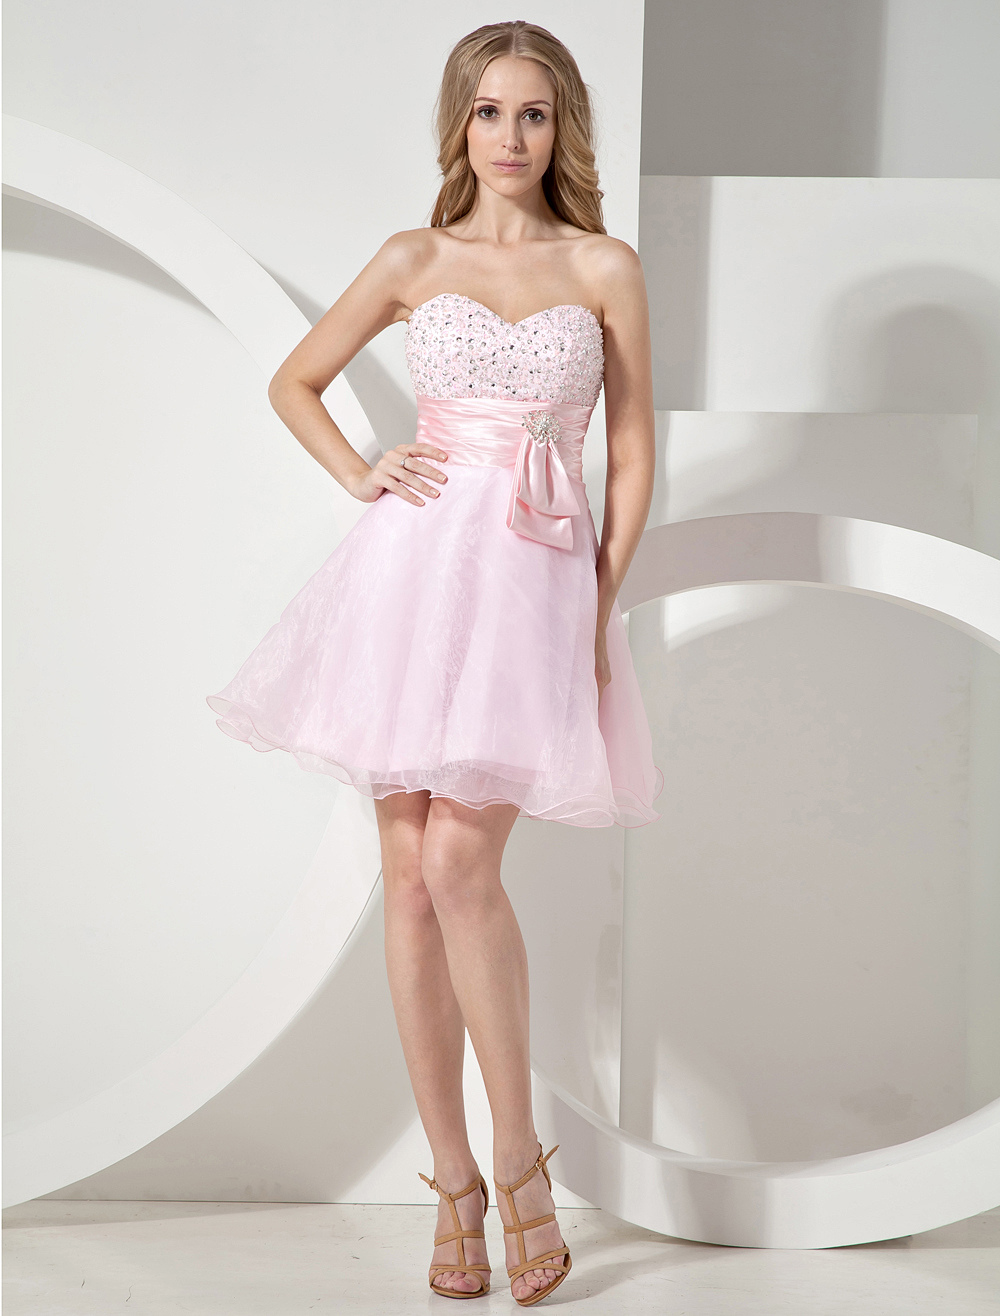 Pink Sweetheart Homecoming Dress with Beading Details - Milanoo.com